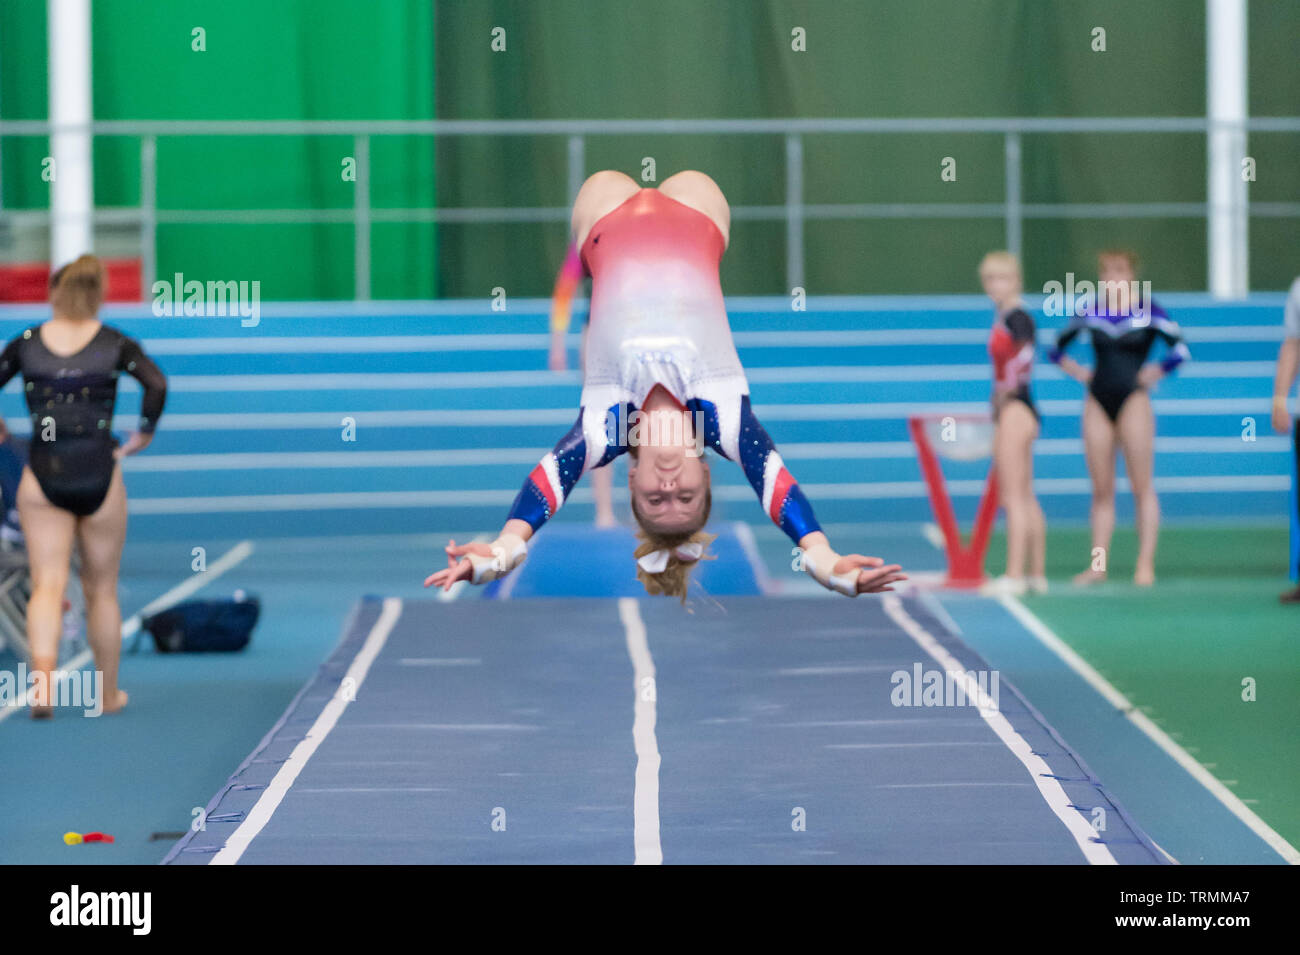 Sheffield, England, UK. 2 June 2019. Sapphire Dallard from OLGA Poole Gymnastics Club in action during Spring Series 2 at the English Institute of Sport, Sheffield, UK. Stock Photo